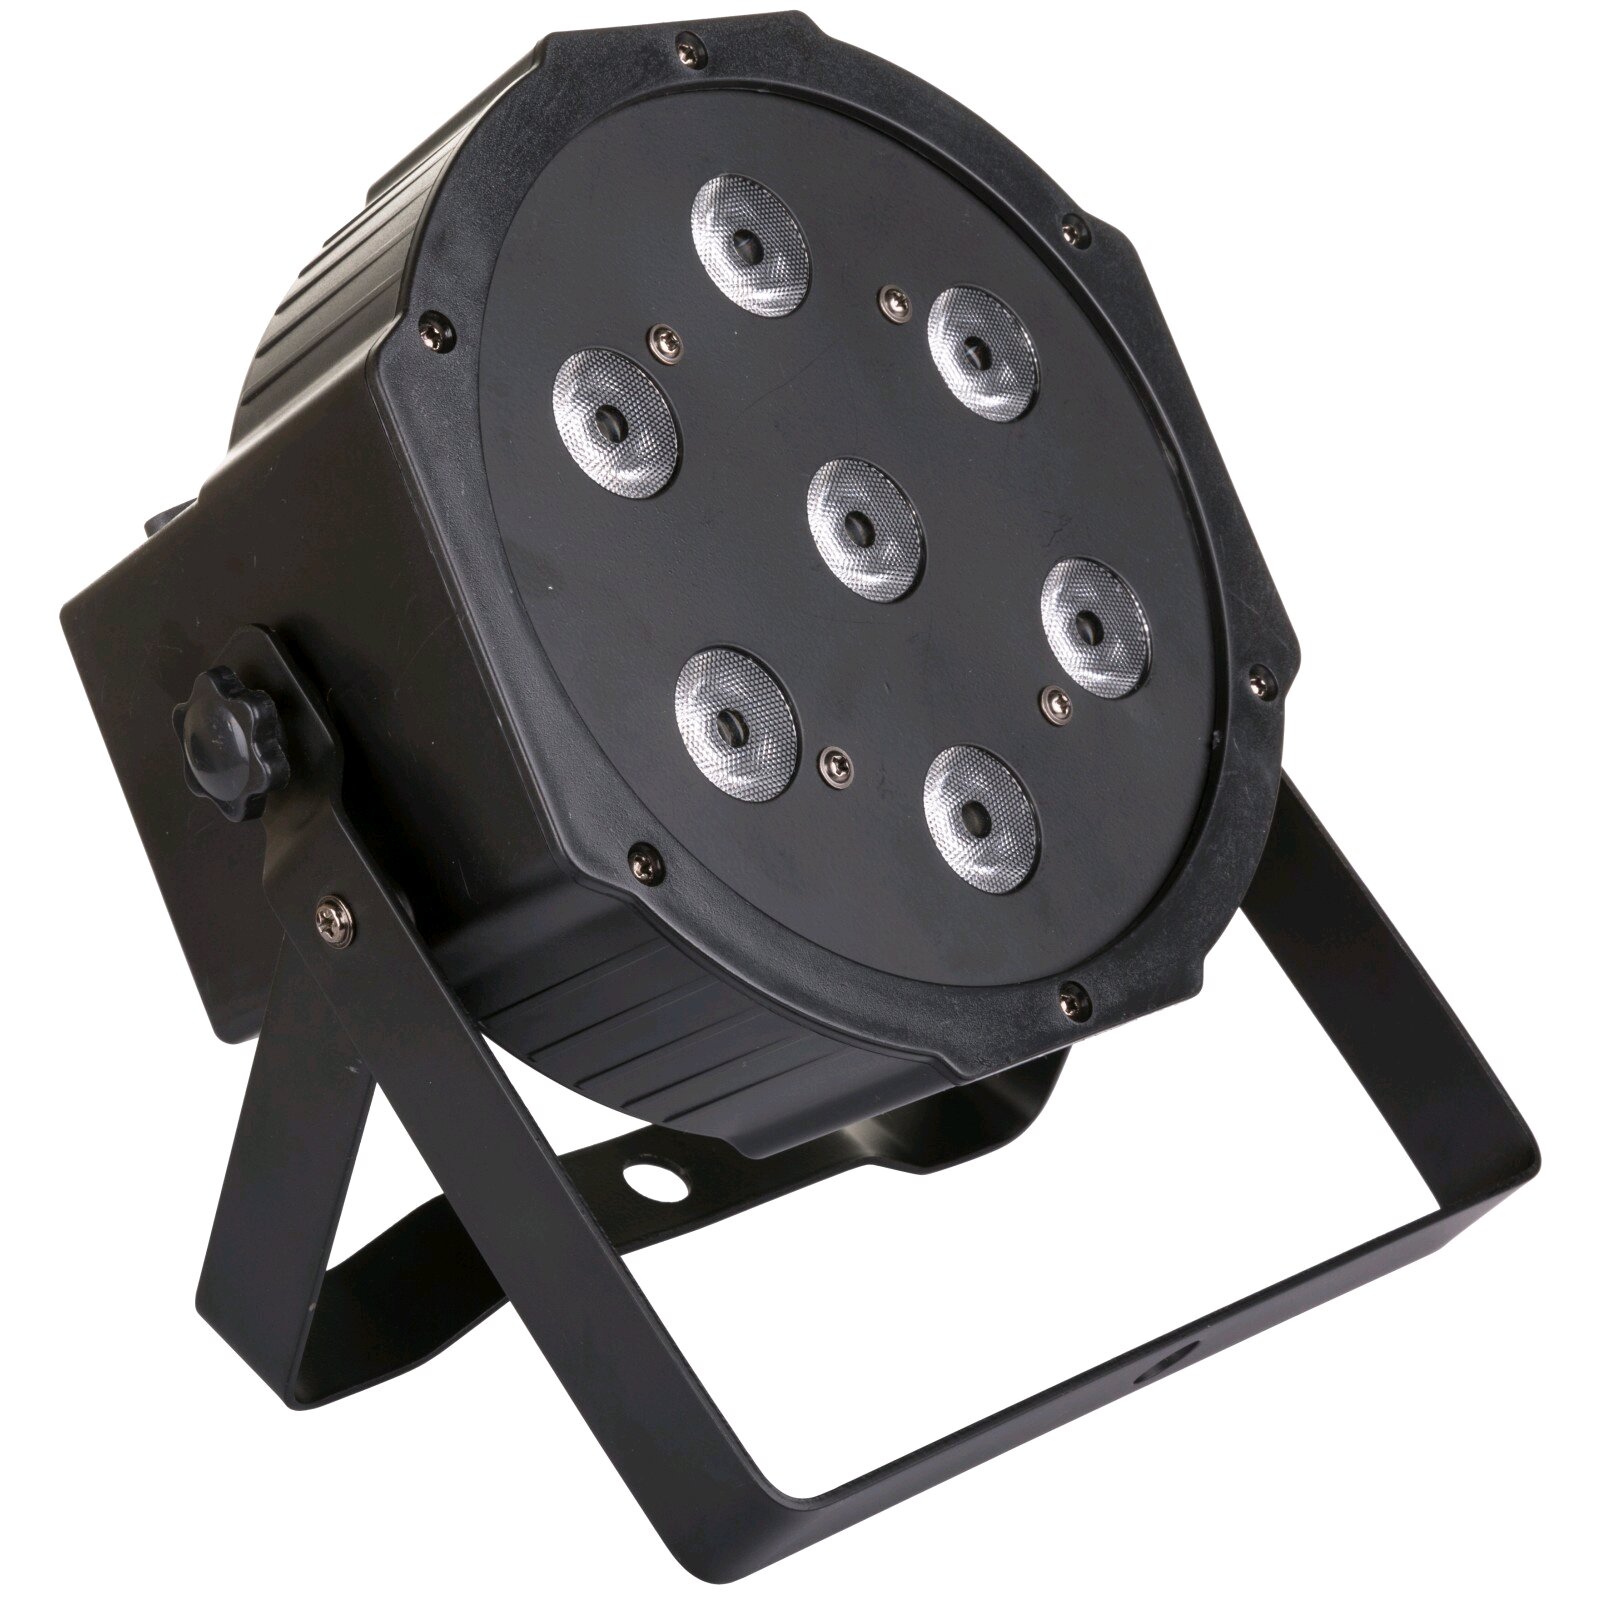 JBSYSTEMS PARTY SPOT - Compact RGBW Led Projector : photo 1